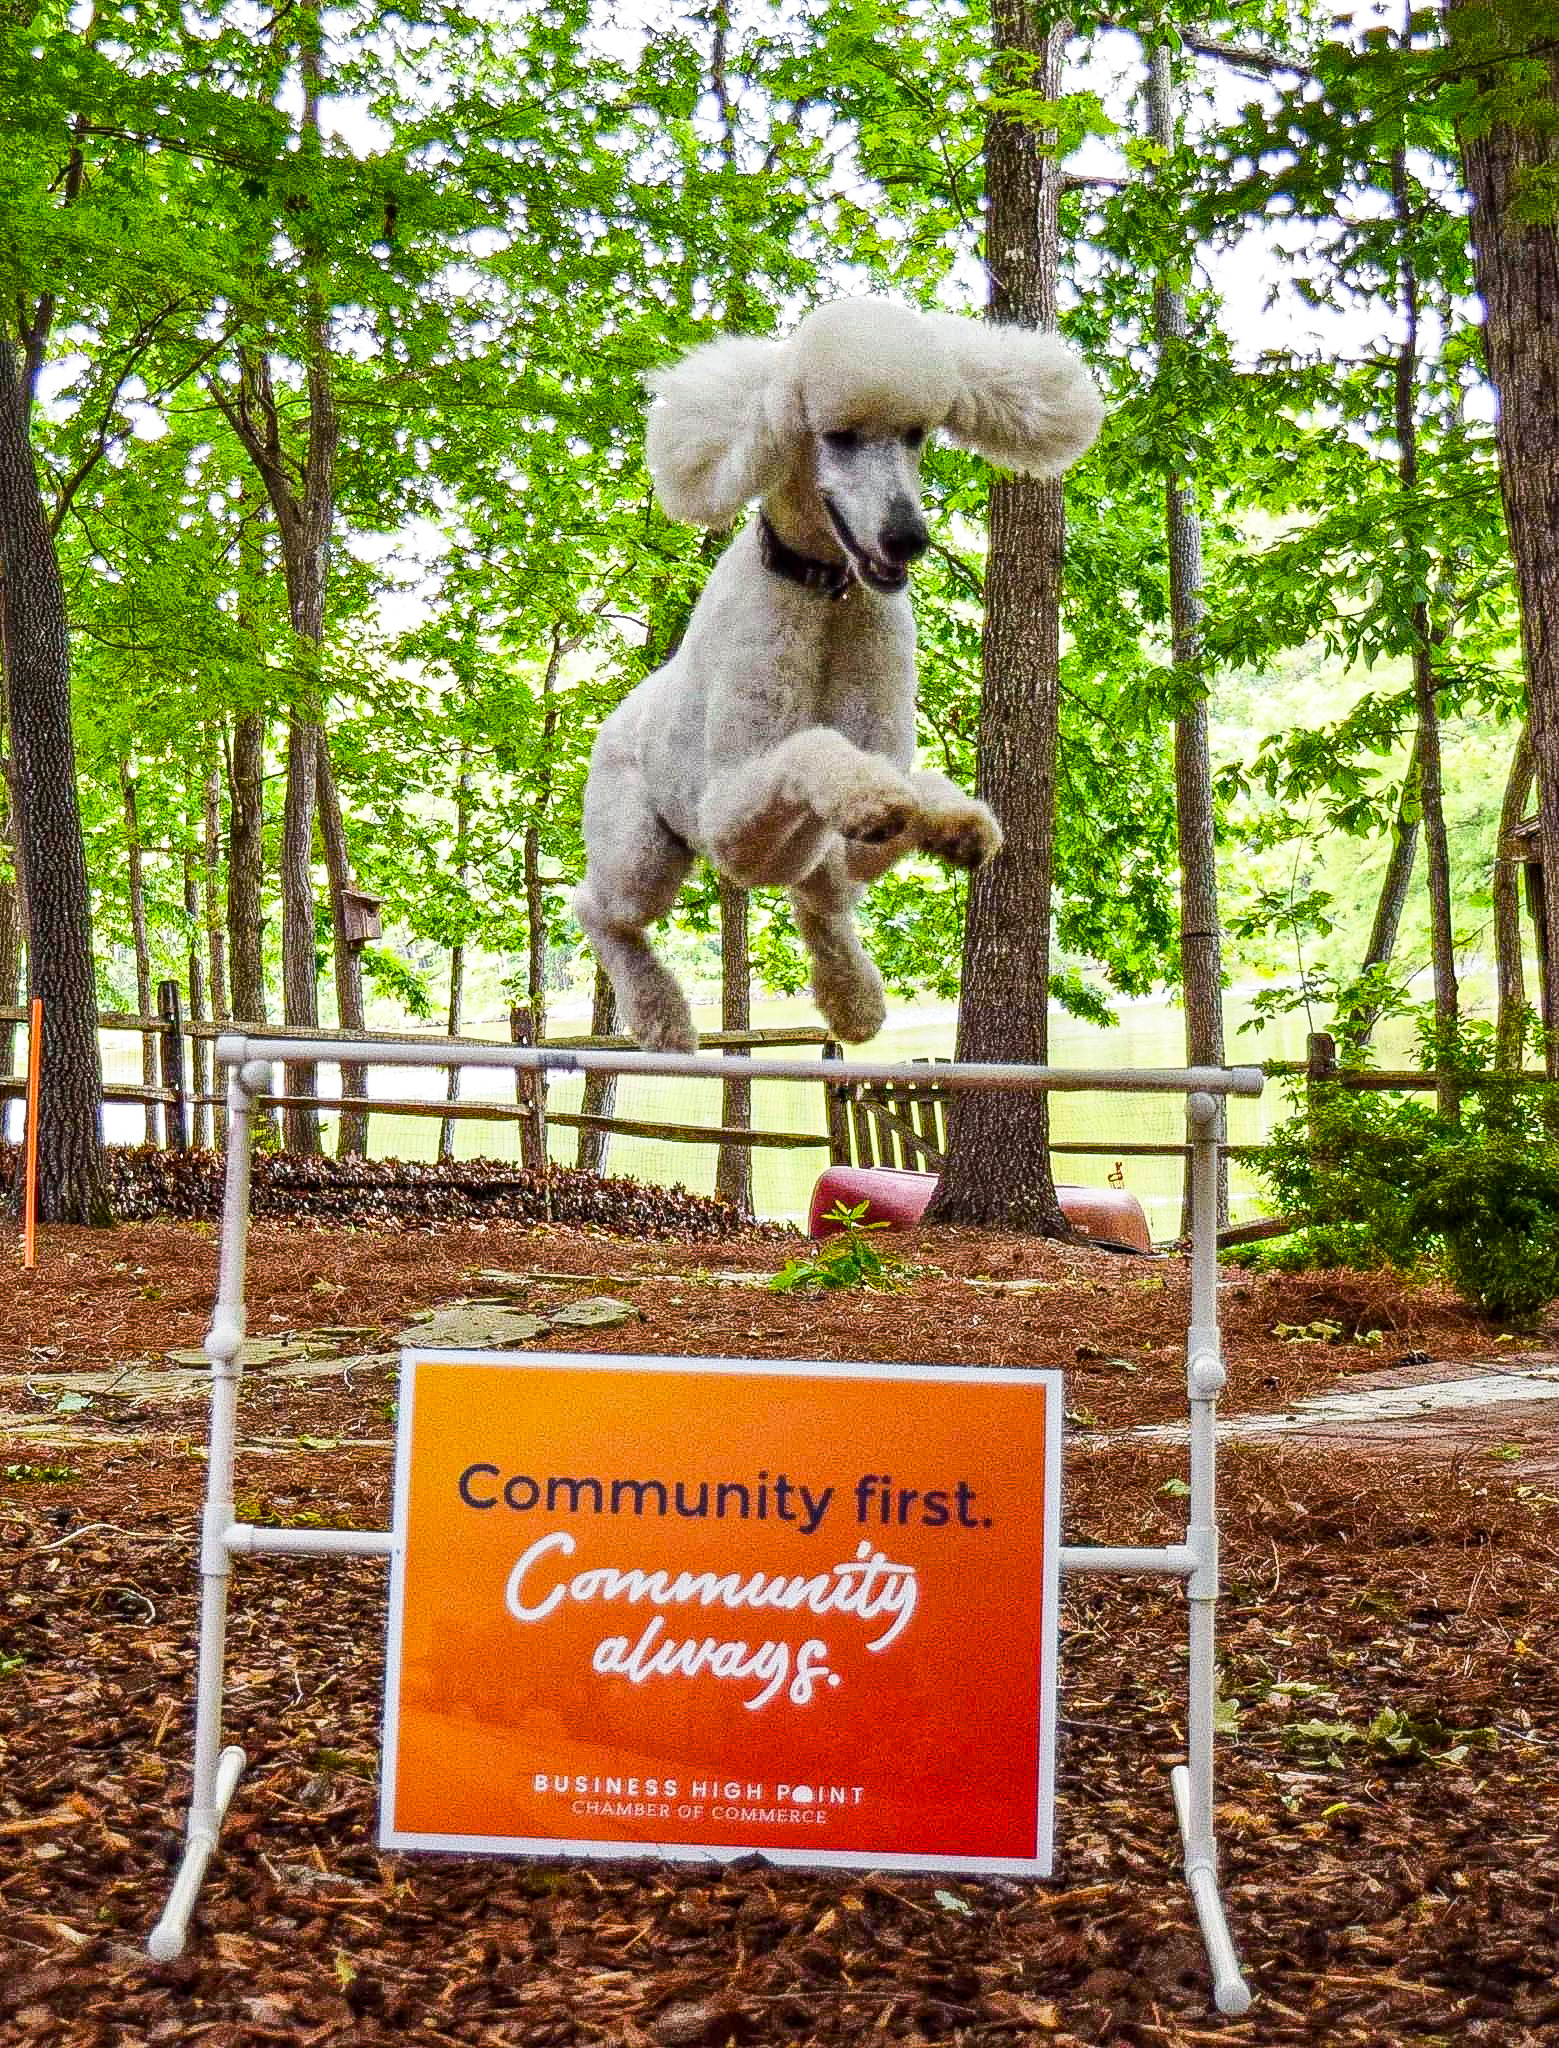 A white poodle jumps over a hurdle that has a "Community First. Community Always." sign on it.